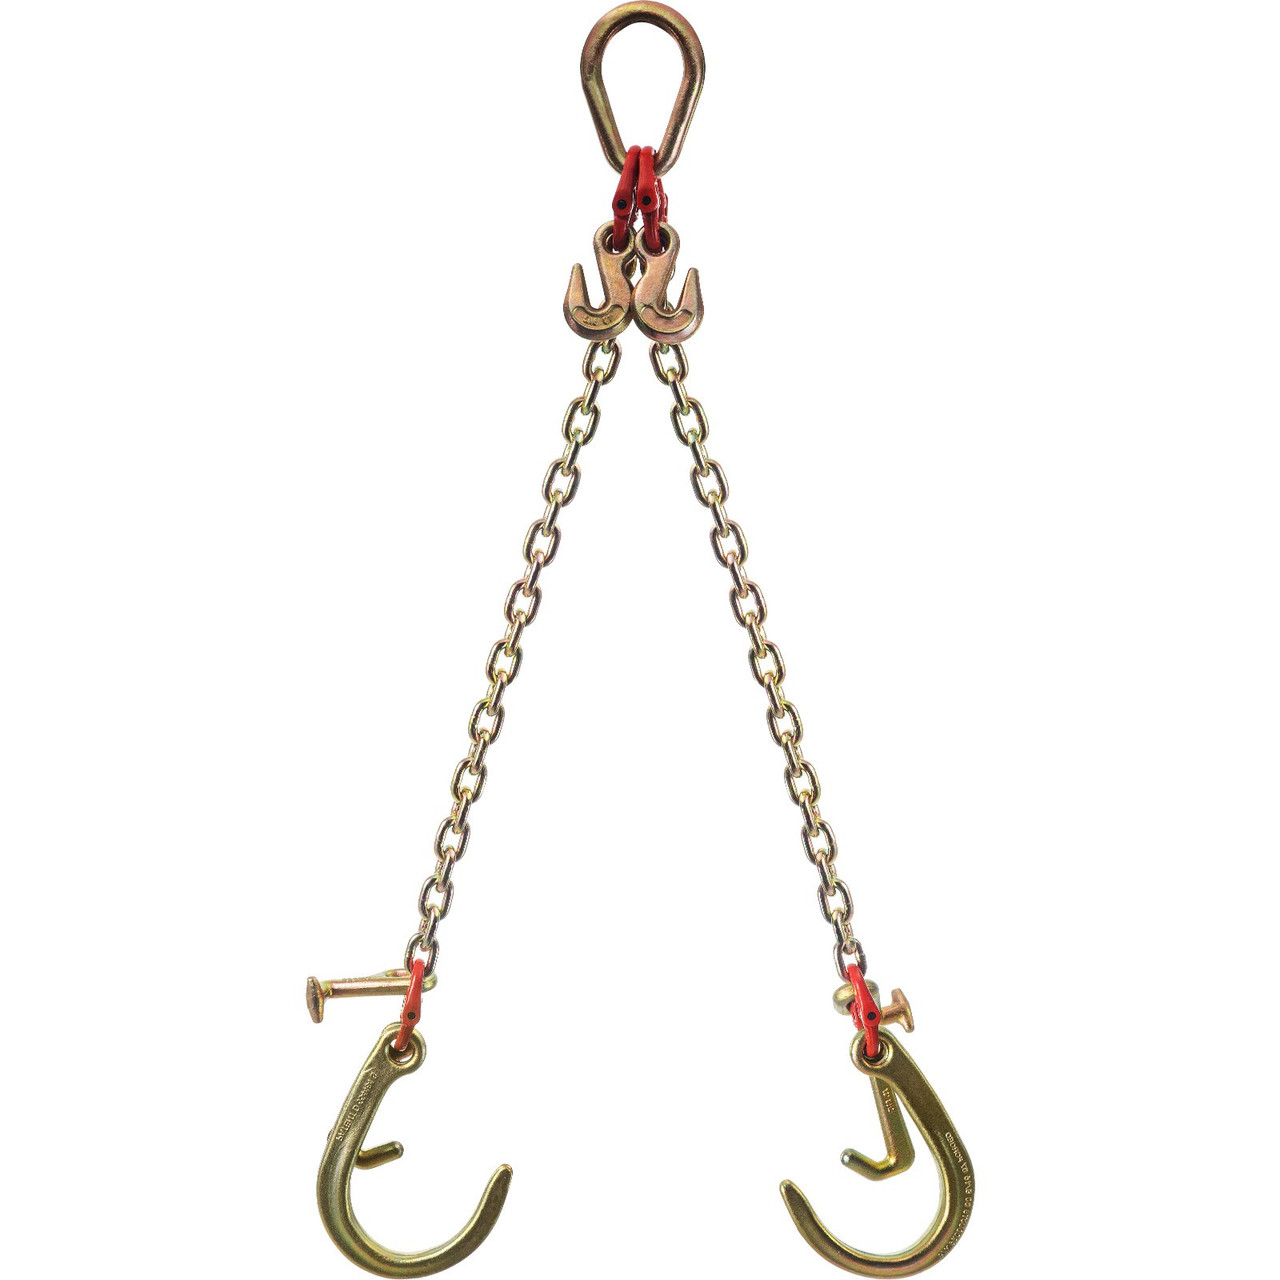 J Hook Chain, 5/16 in x 2 ft Tow Chain Bridle, Grade 80 J Hook Transport Chain, 9260 Lbs Break Strength with TJ Hook & Grab Hook, Heavy Duty Pear Link Connector and Chain Shorteners